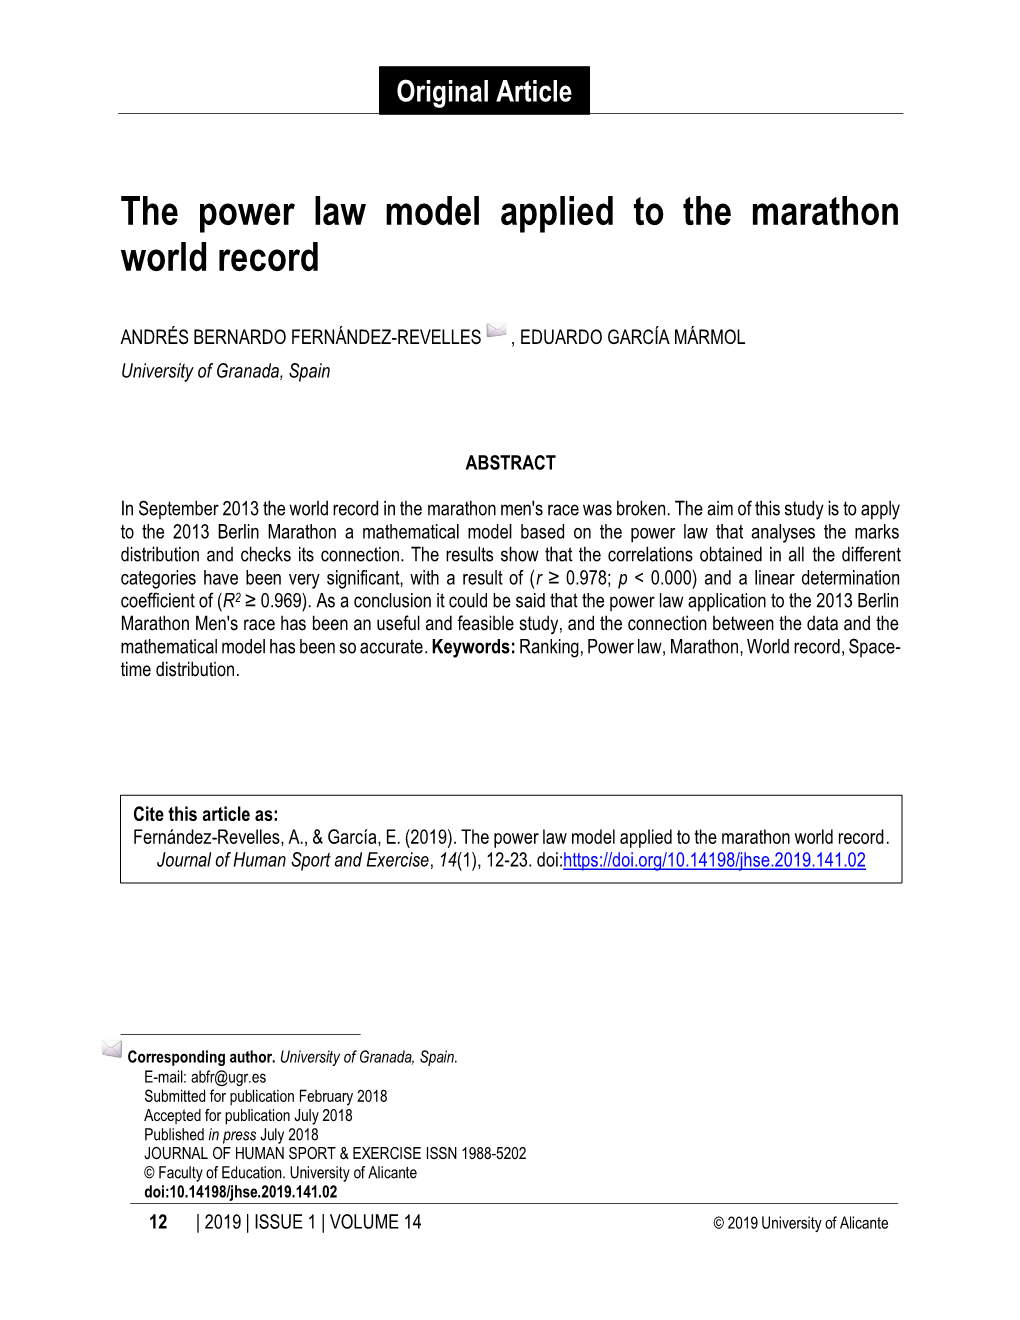 The Power Law Model Applied to the Marathon World Record